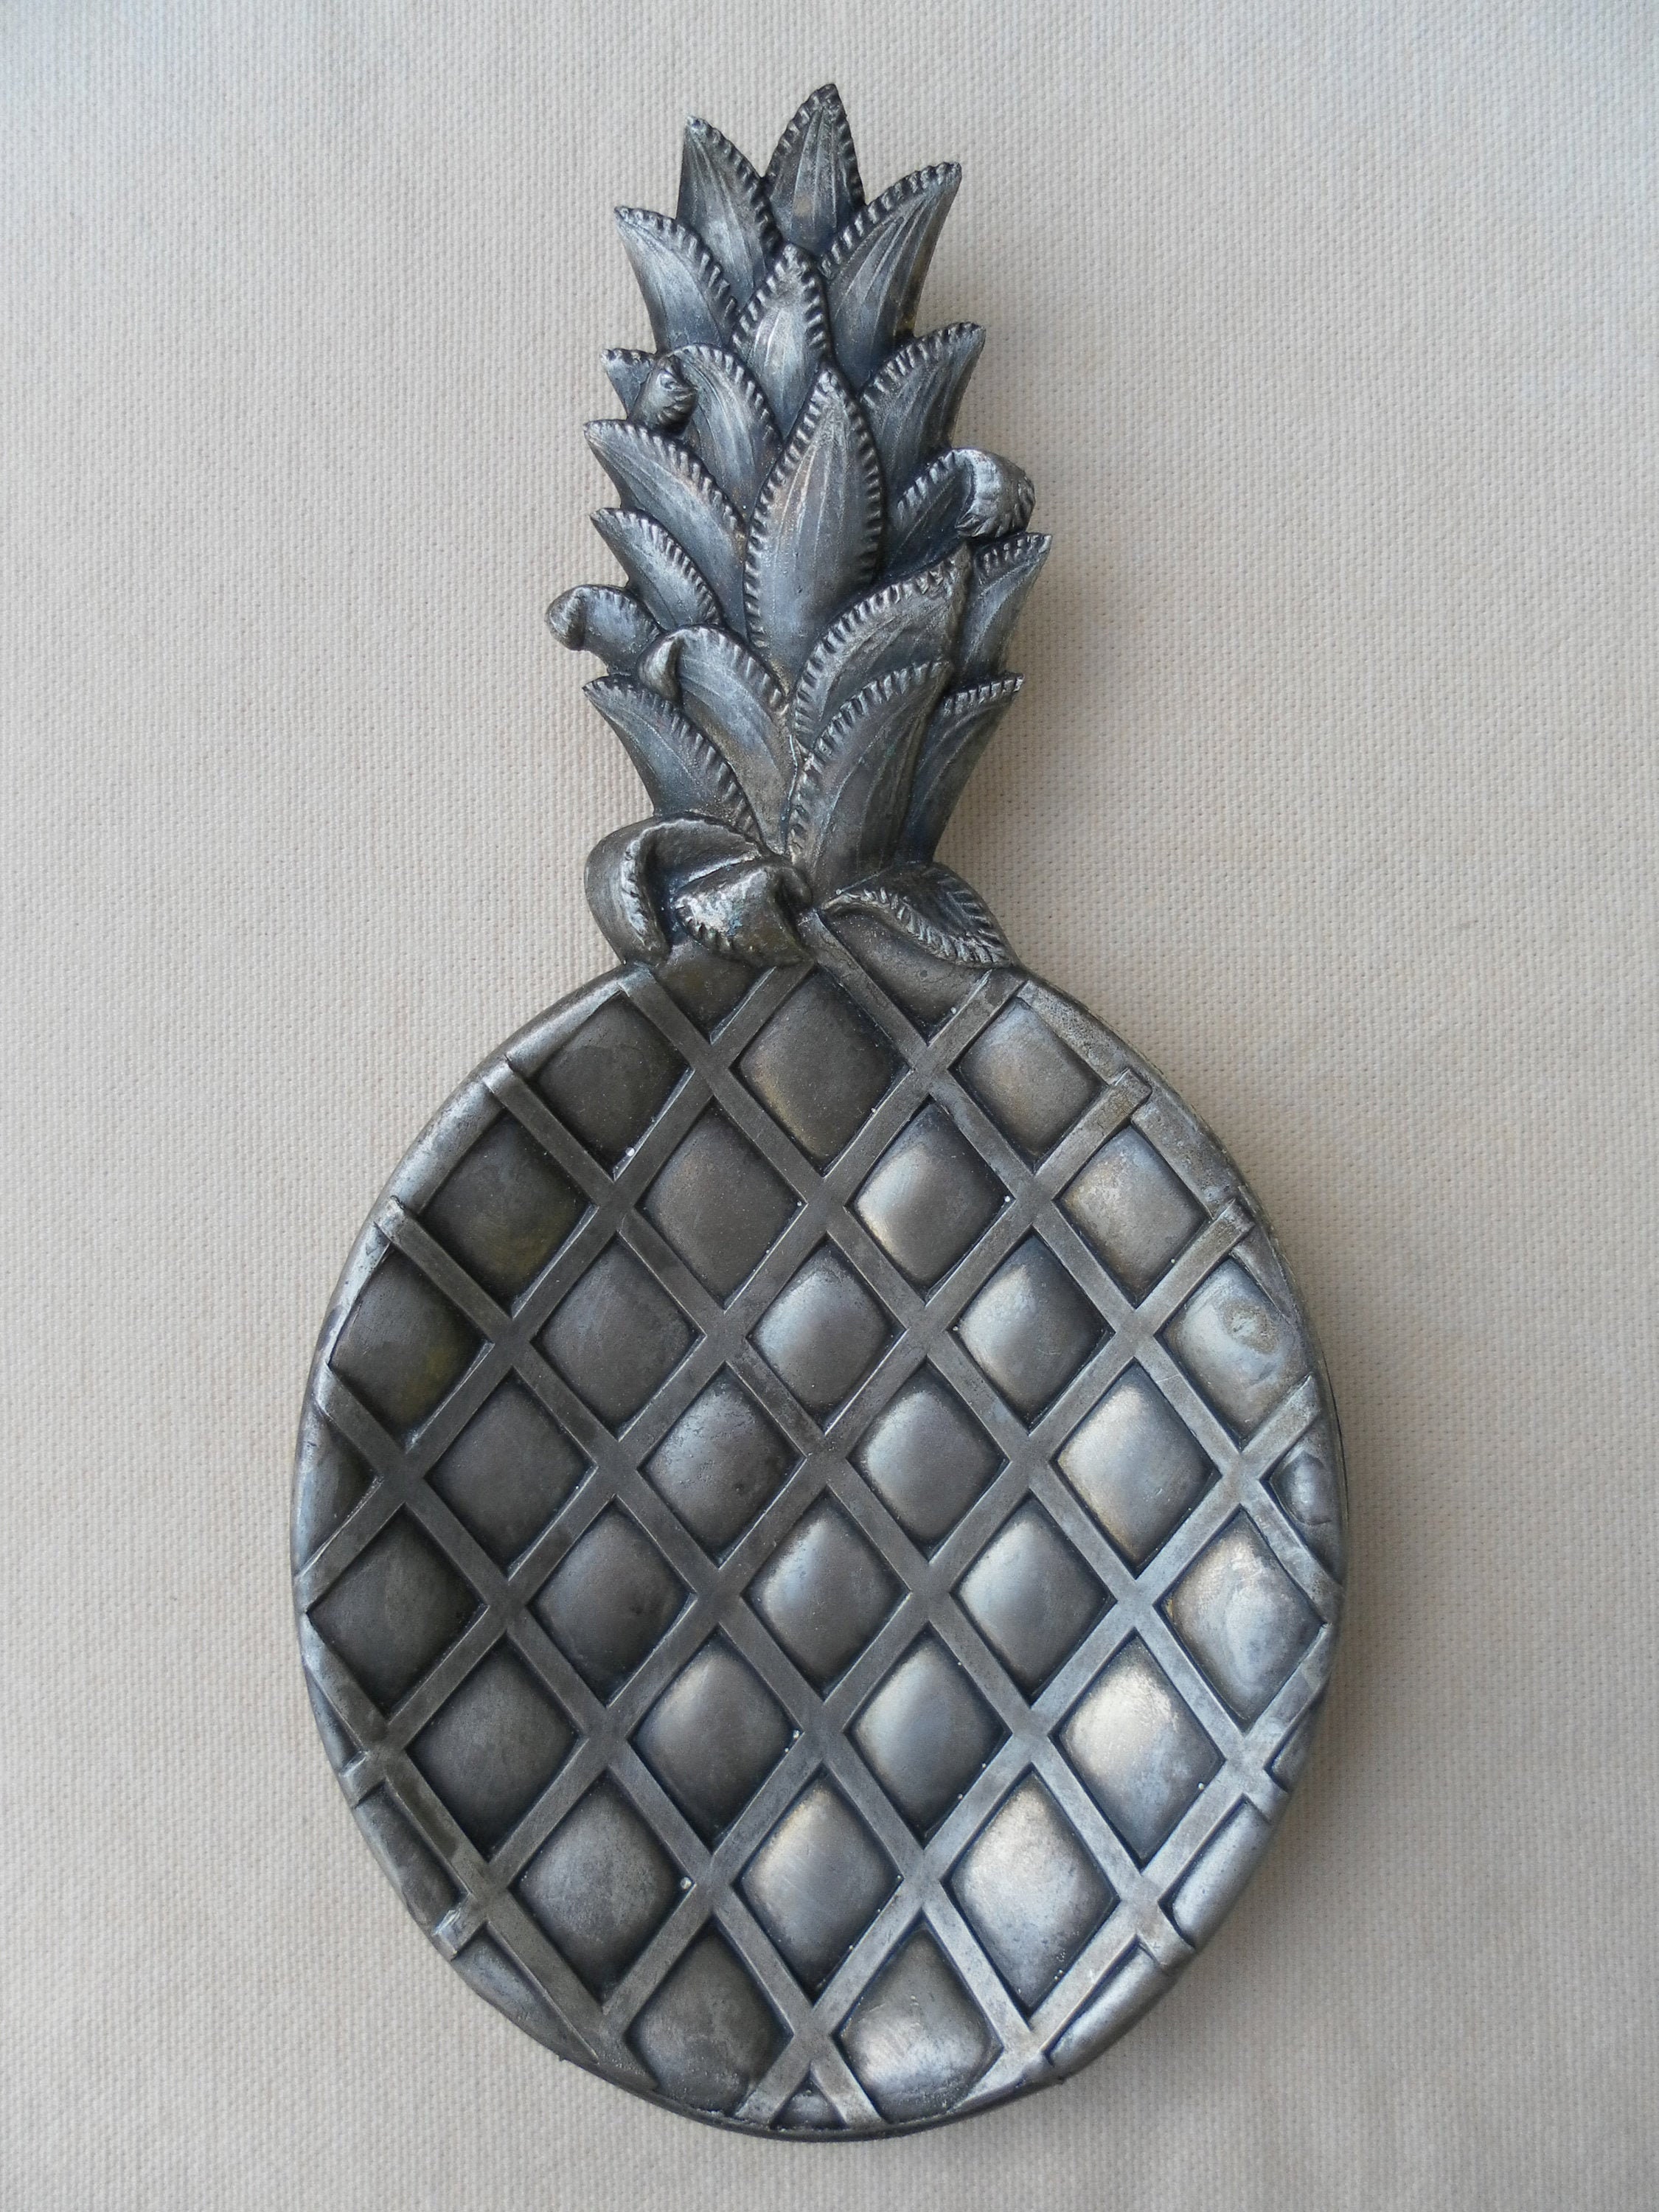 Silver Metal Dish - Pineapple Form